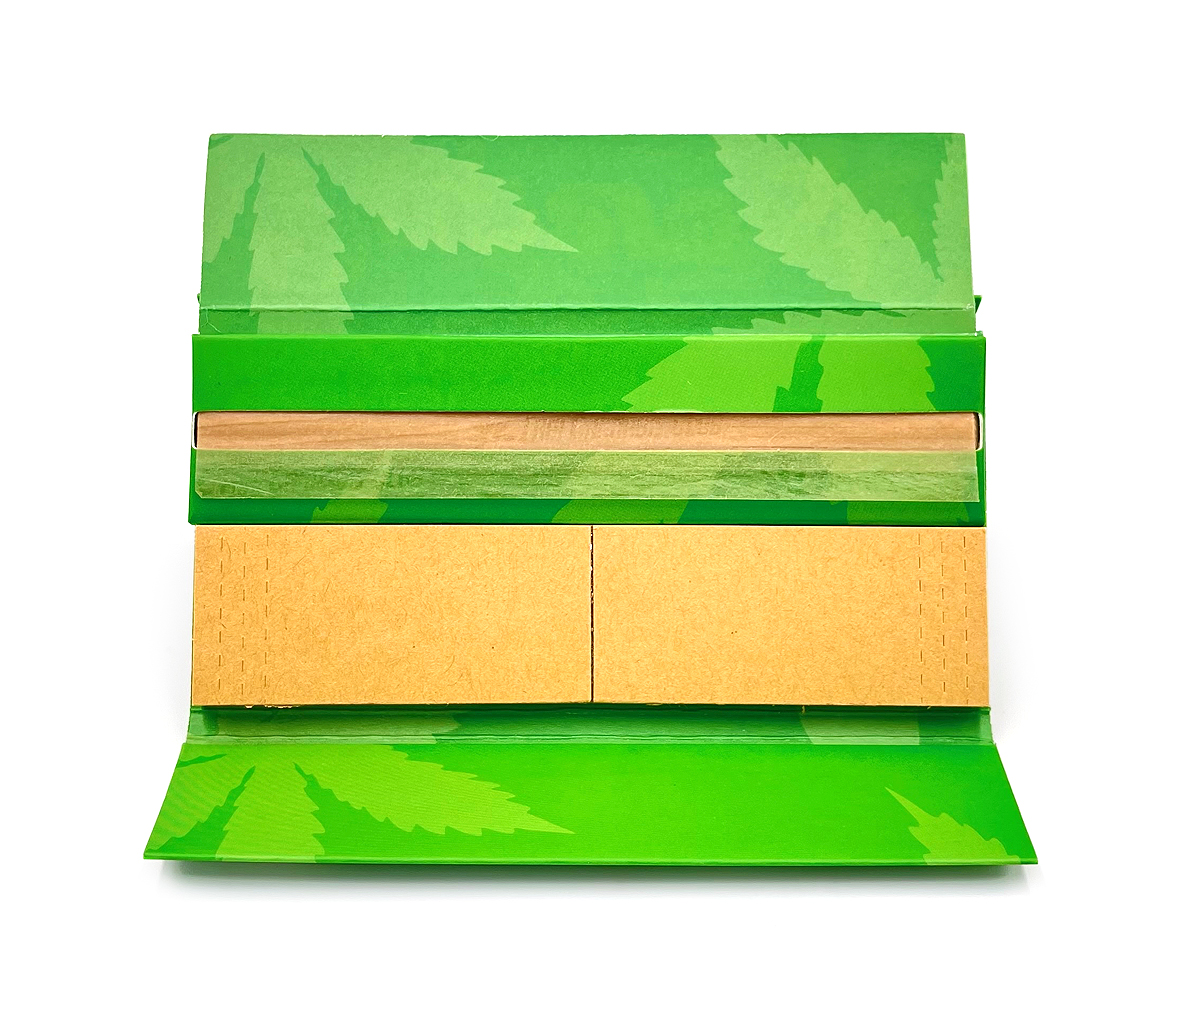 All in One Rolling Paper Kit w/ Grinder